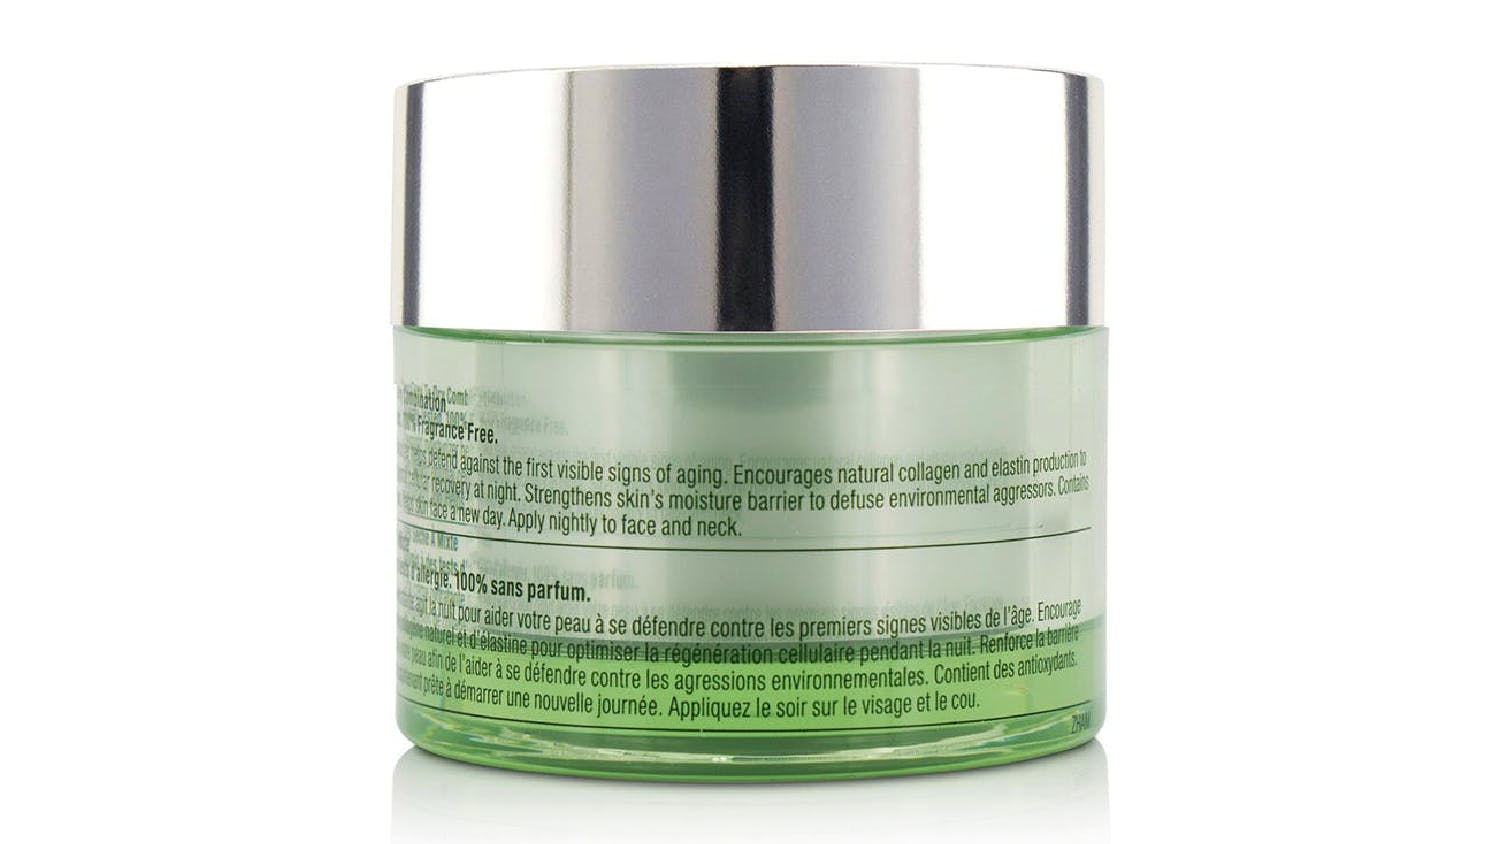 Clinique Superdefense Night Recovery Moisturizer - For Very Dry To Dry Combination - 50ml/1.7oz